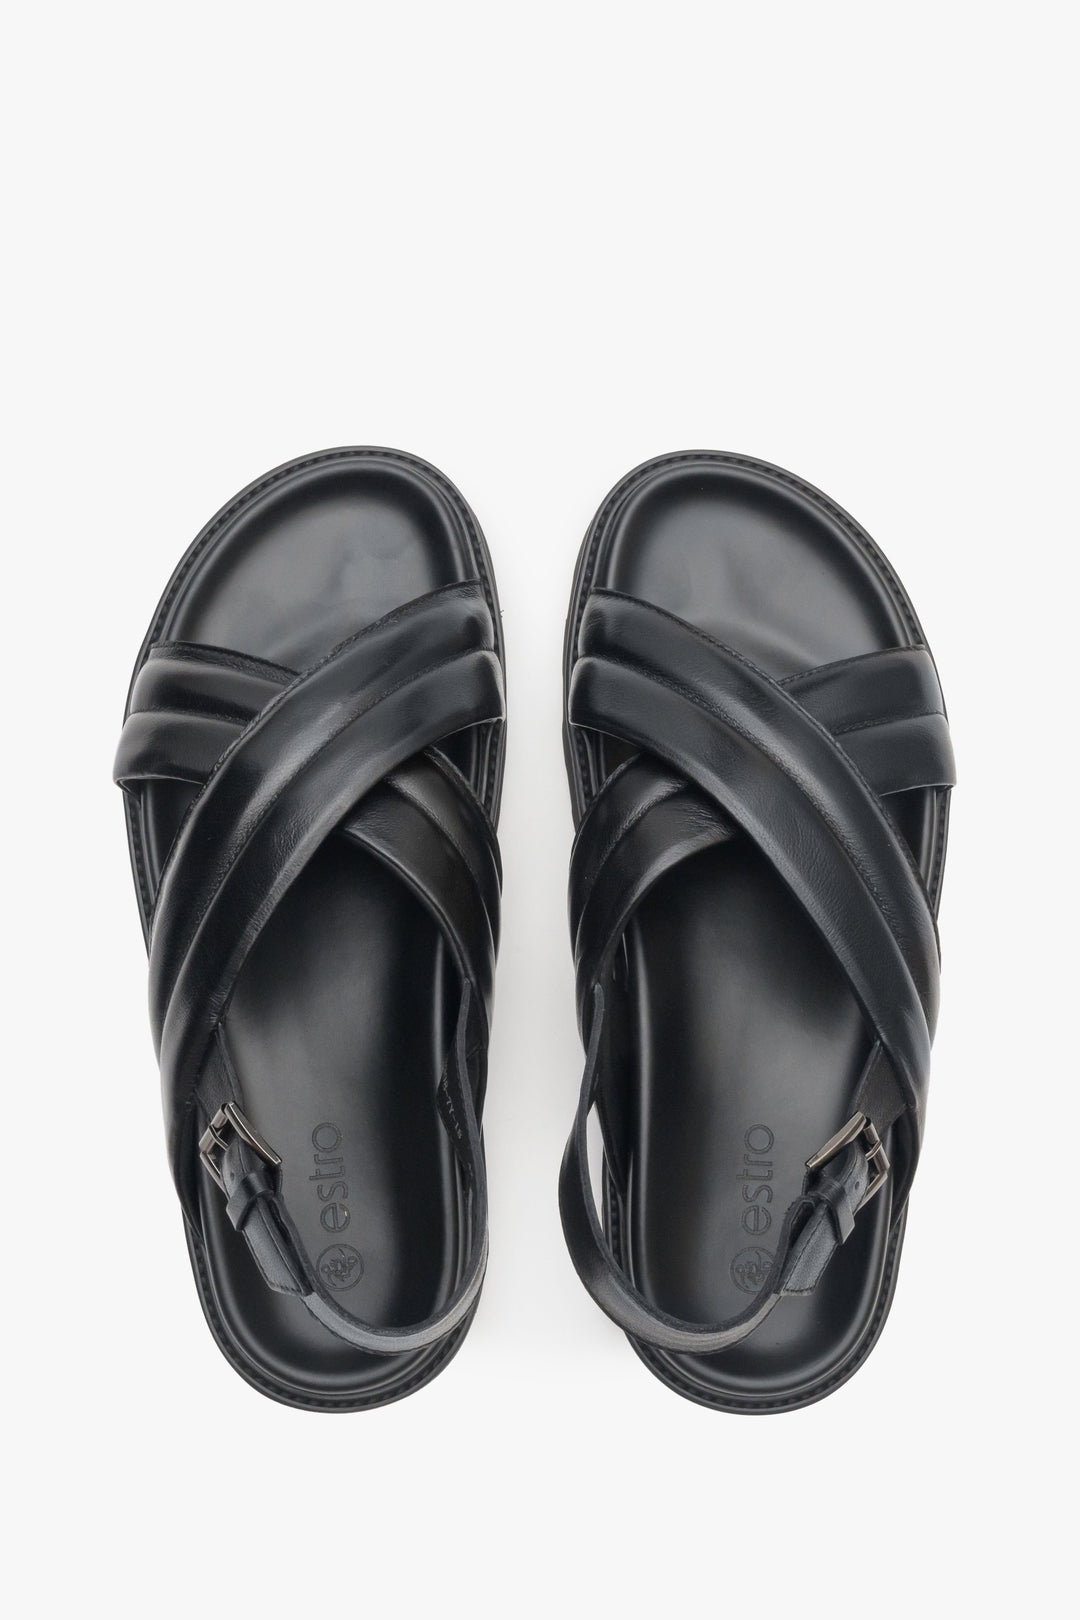 Men's black leather  sandals by Estro with a soft sole - top view presentation of the footwear.